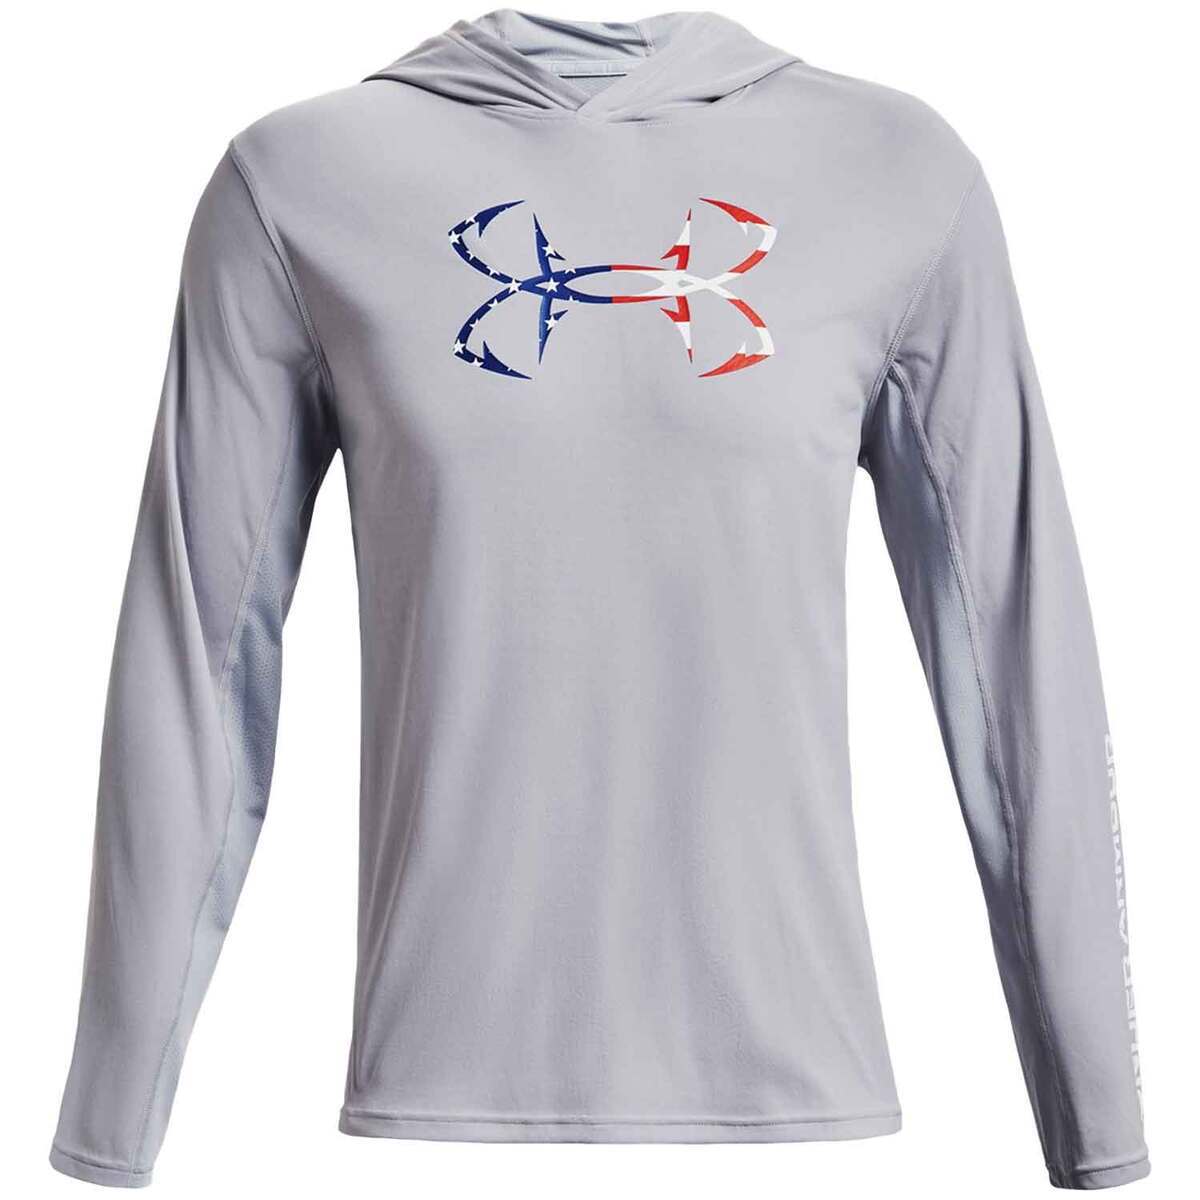 Under Armour Hooded Fishing Shirts